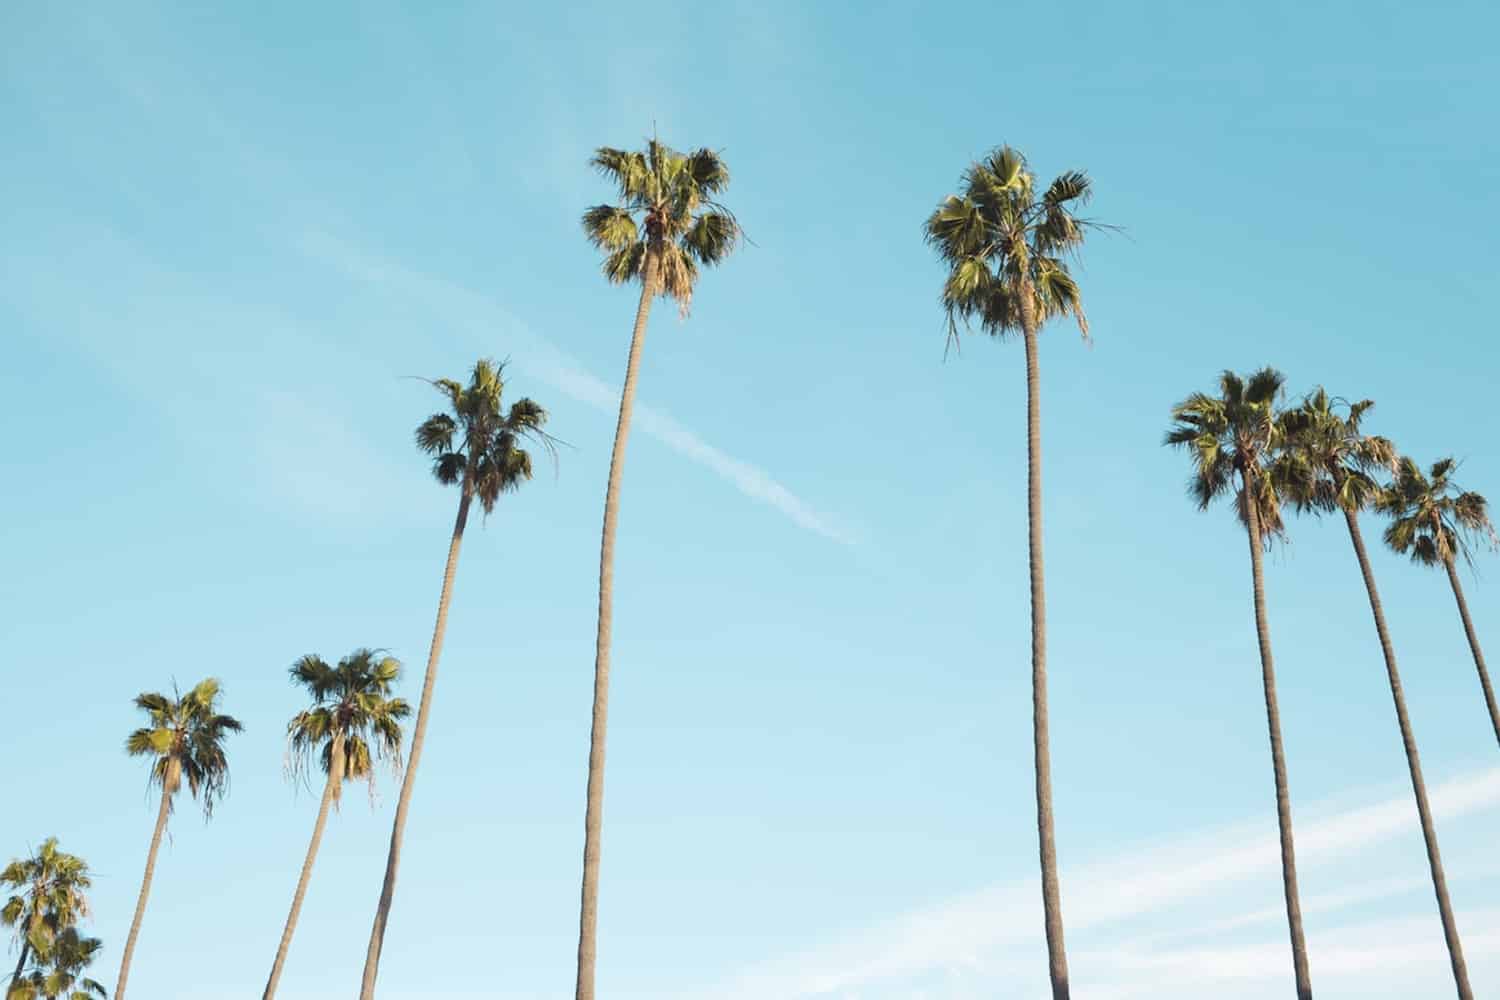 Queer In The World's Complete List of Top Gay Palm Springs Events 🌴